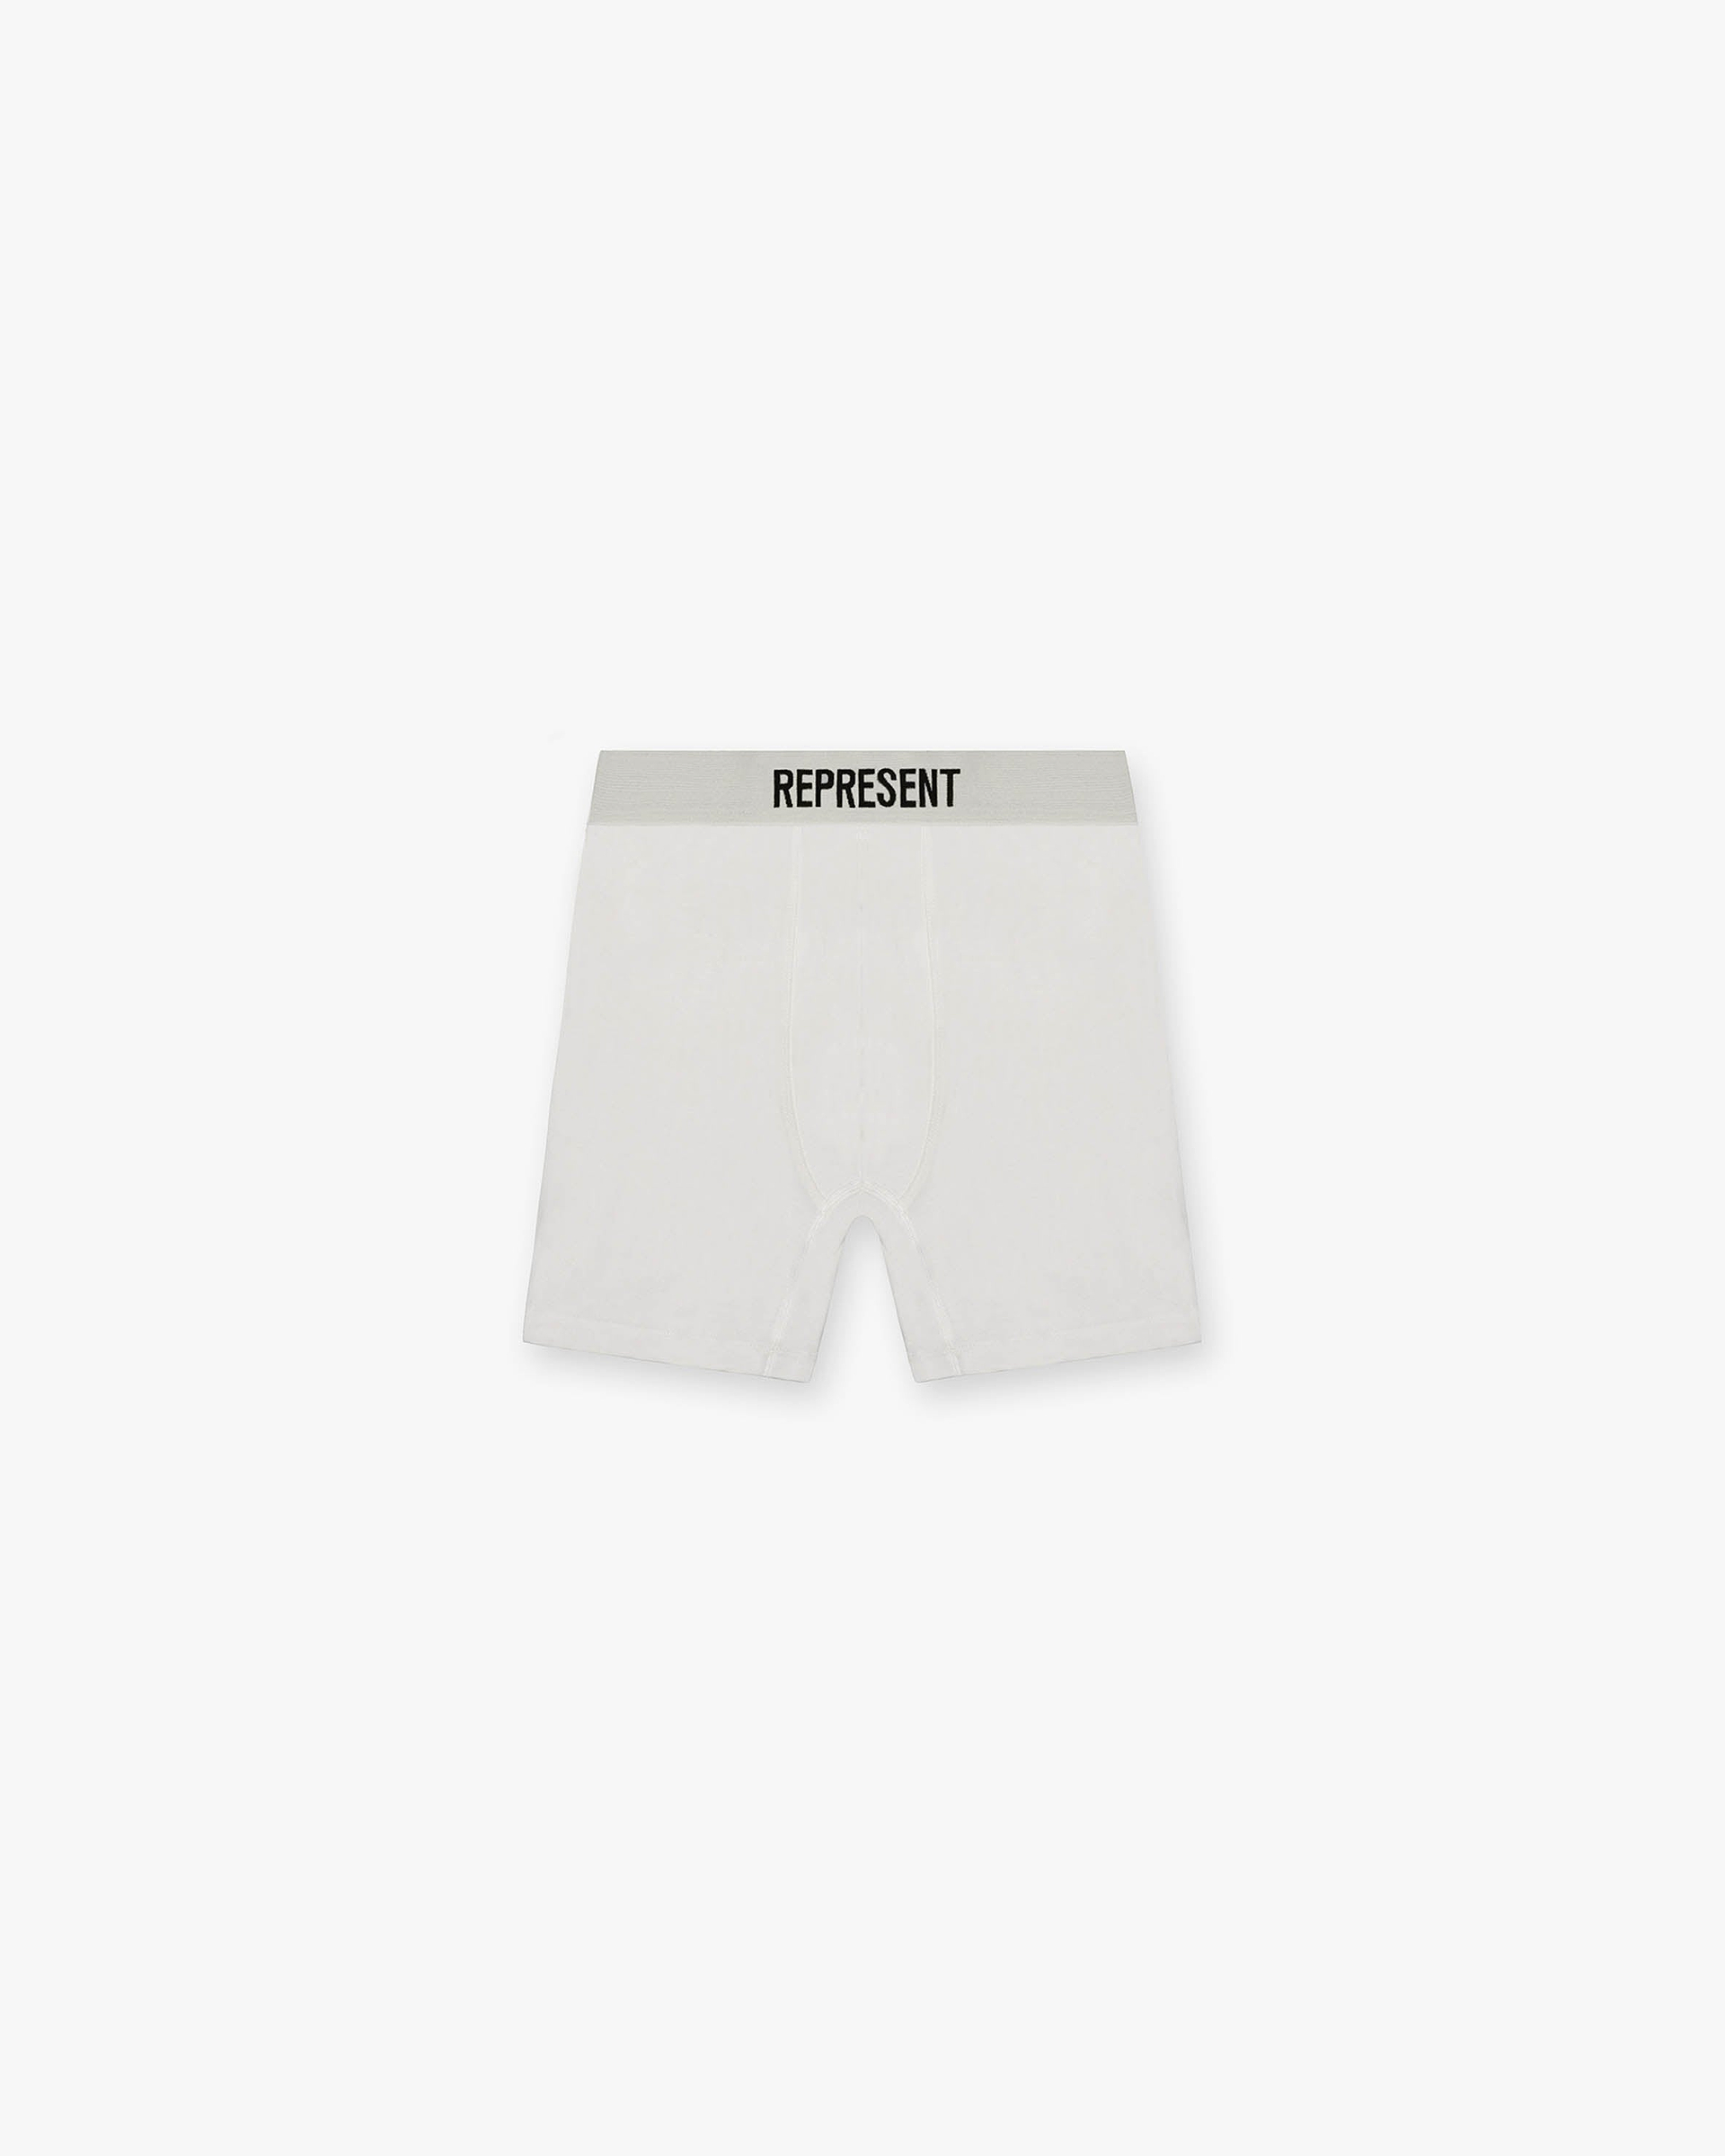 Represent Boxers 2 Pack - Flat White